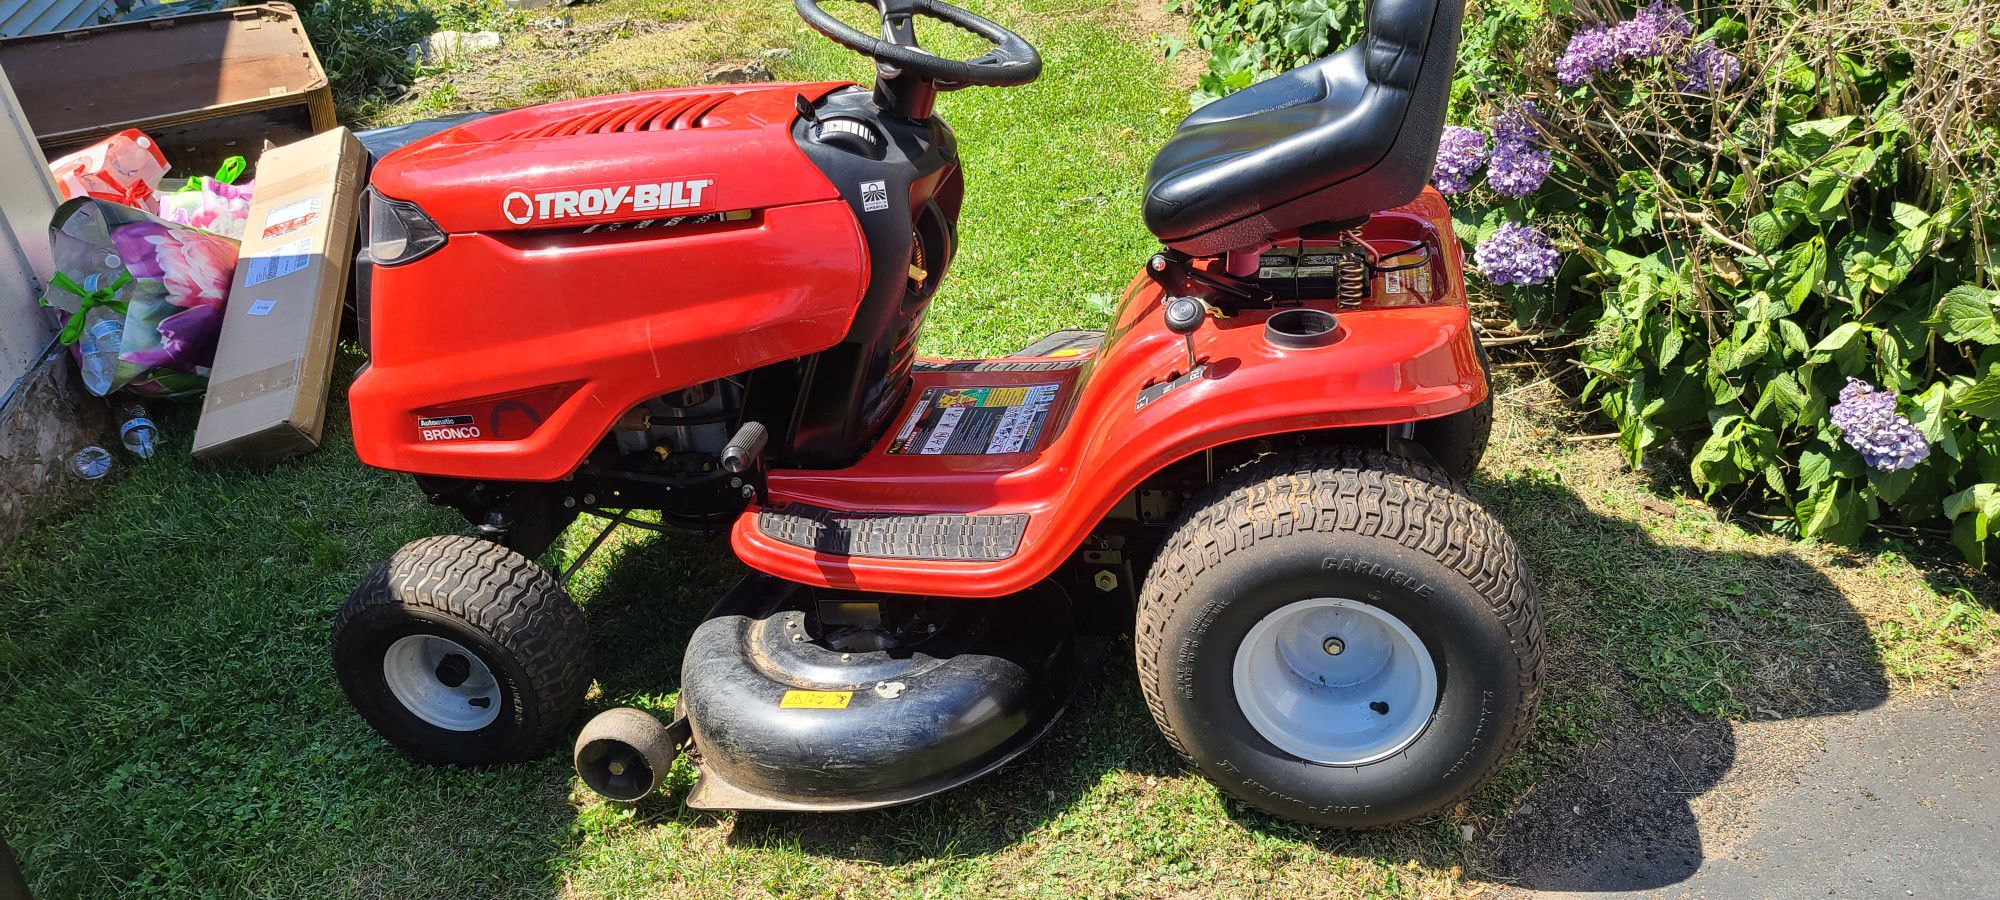 TROY-BILT Automatic Lawn Tractor 42in Blade!!!!!